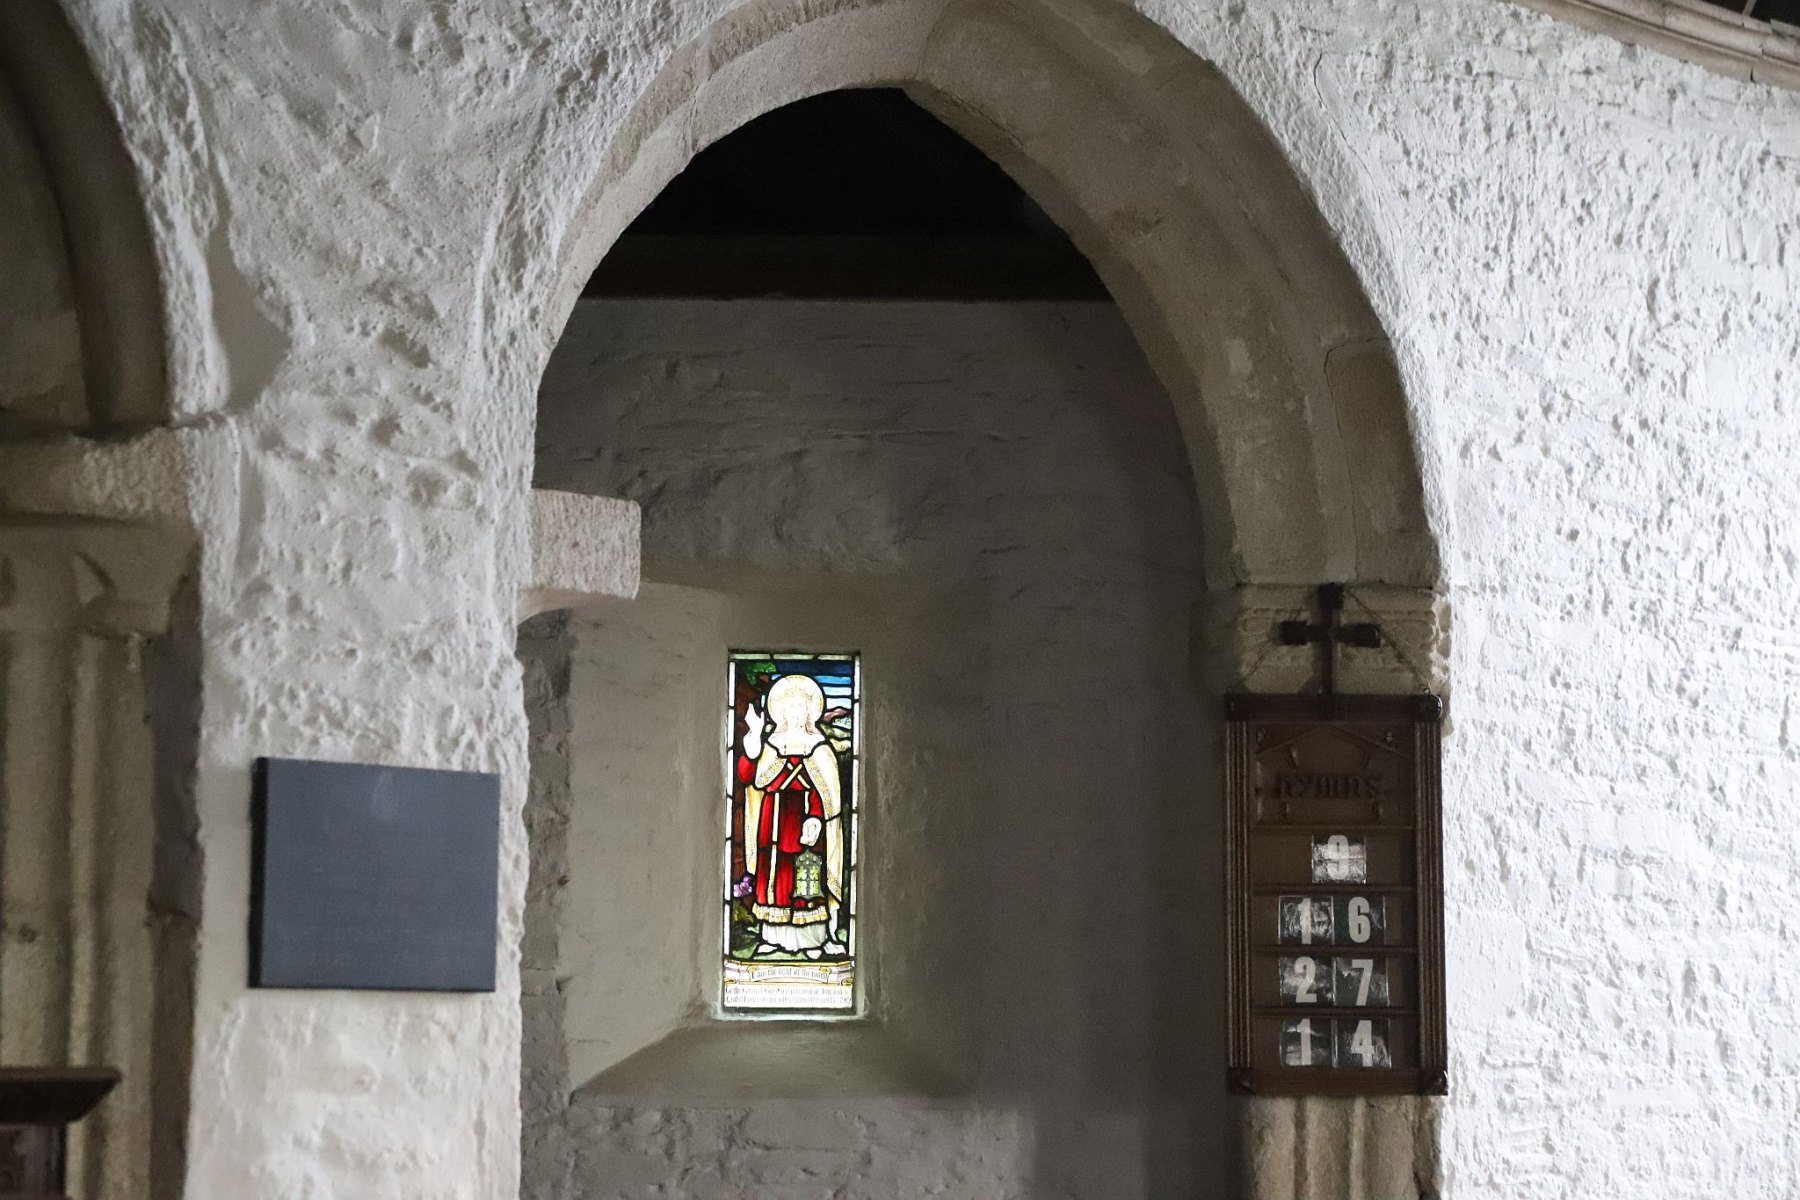 Stained glass window at St. Eval Parish Church near Newquay in Cornwall